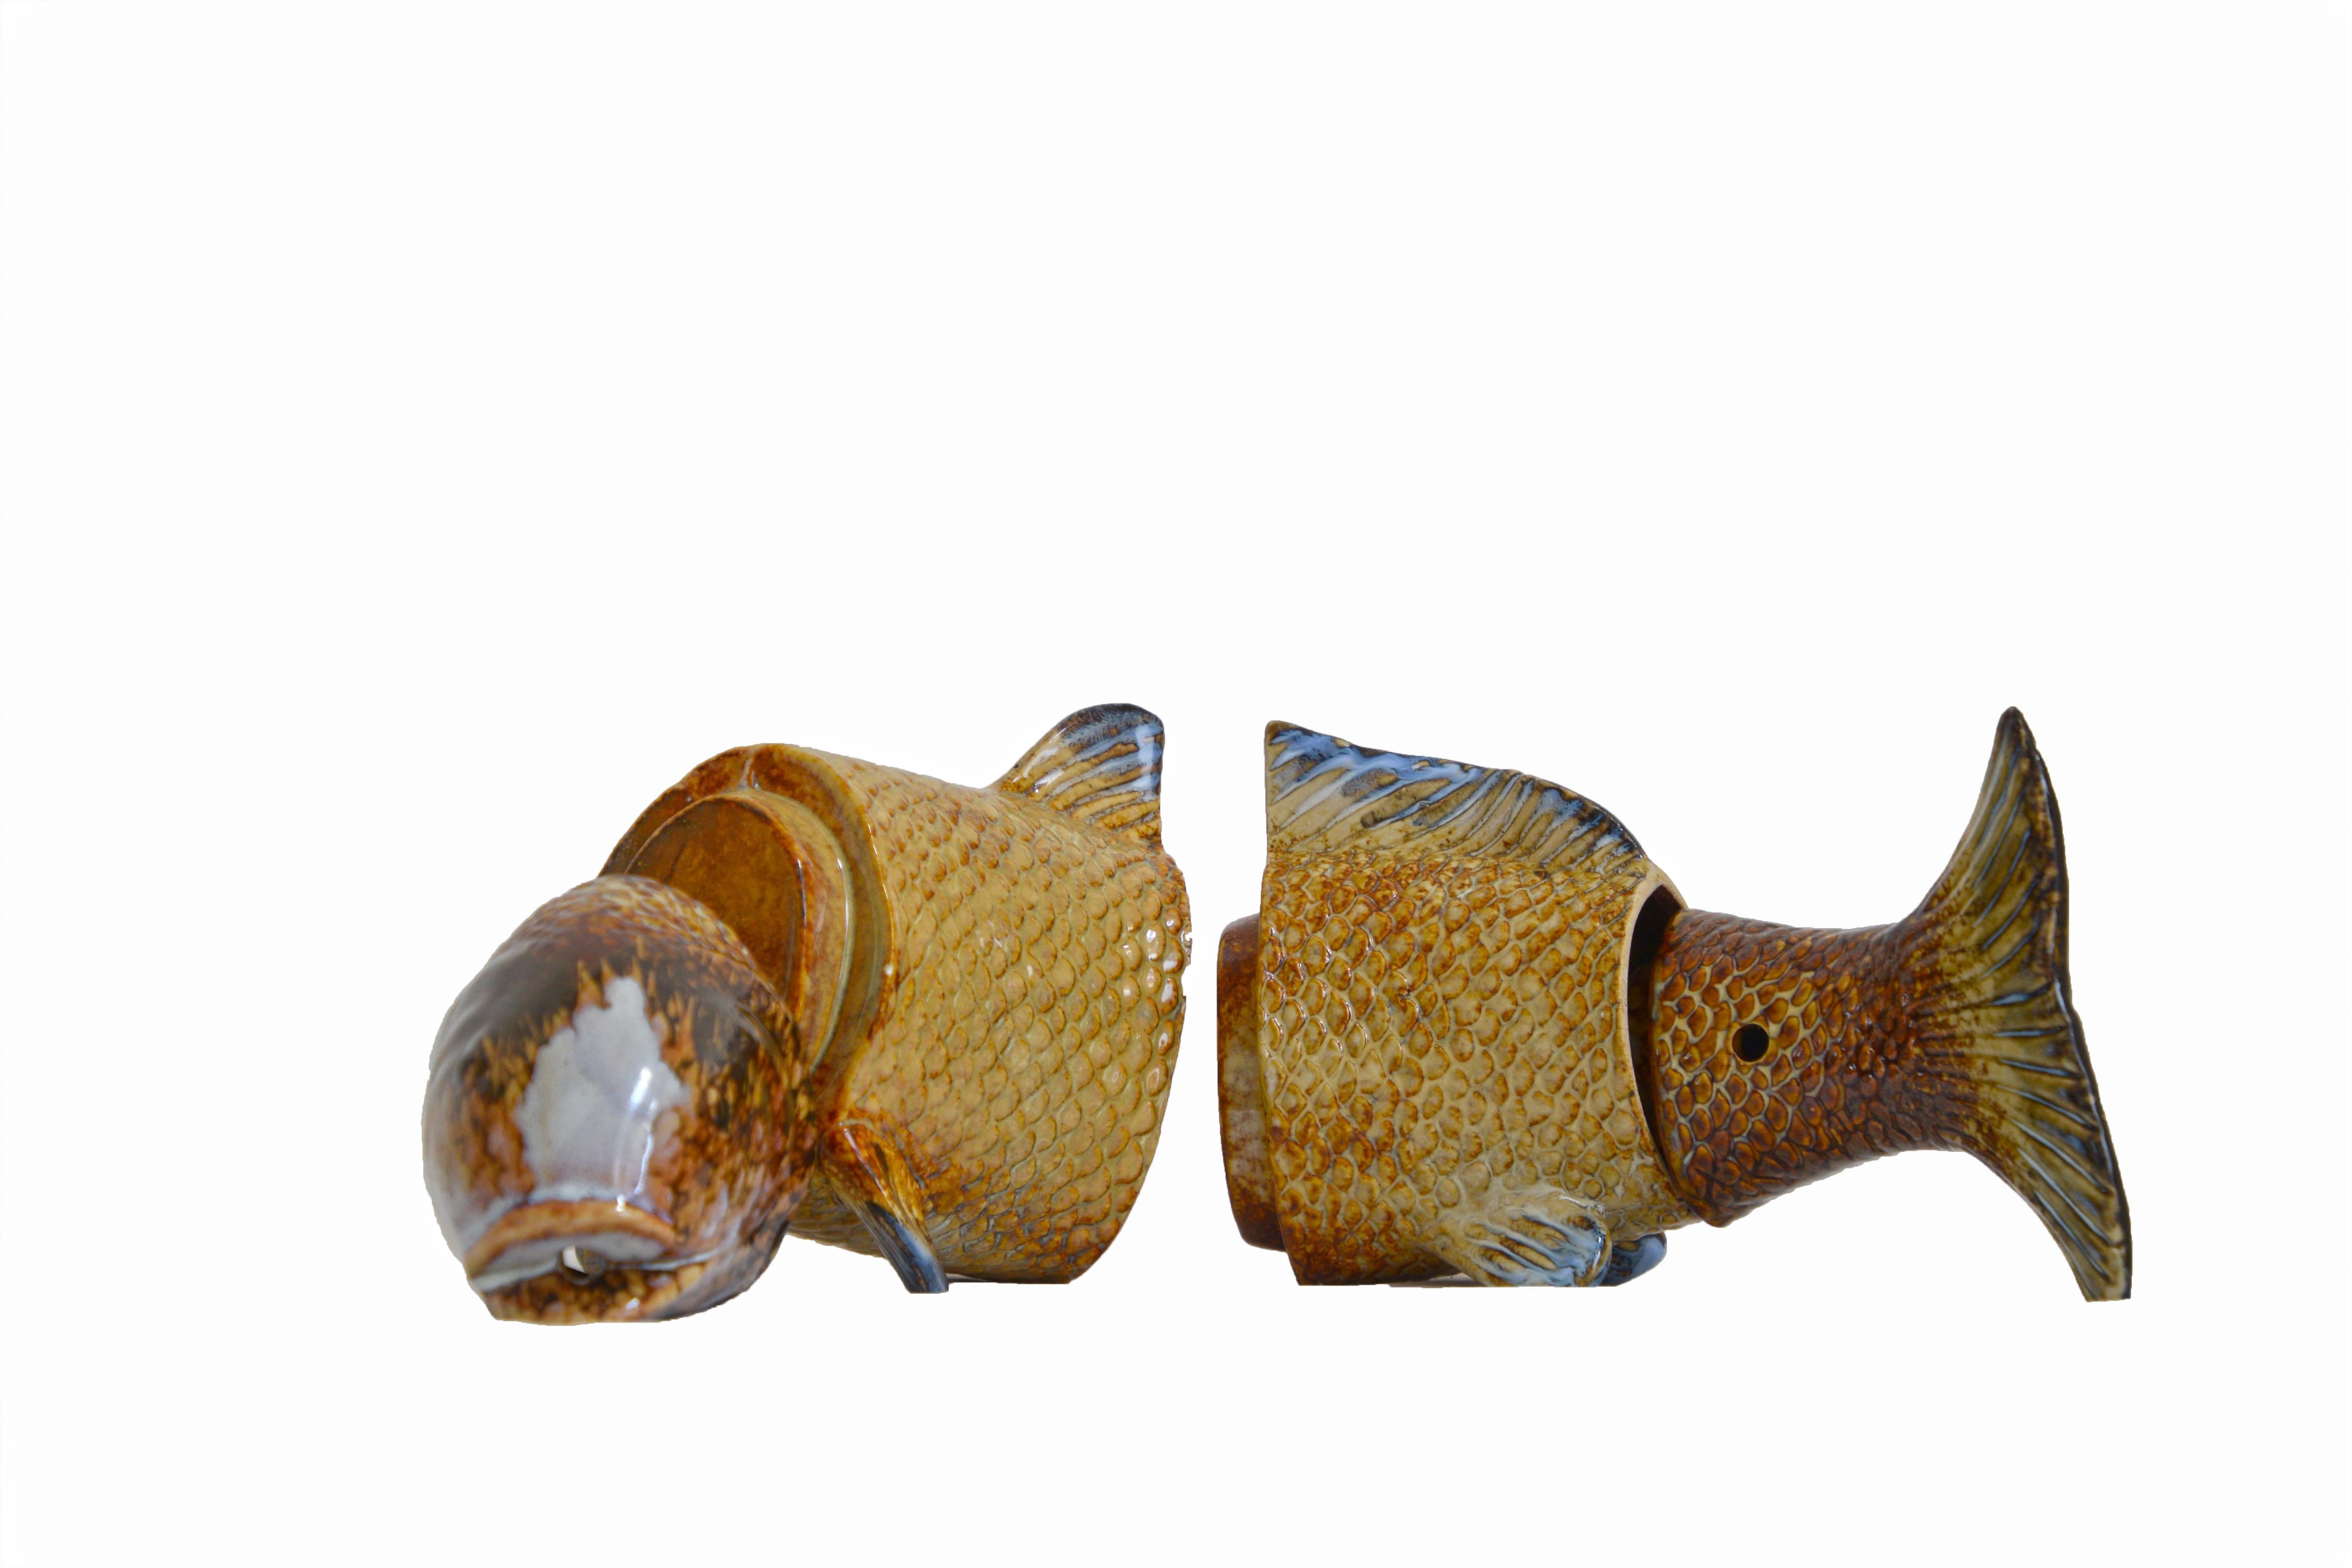 Ceramic 4 pieces carp decoration object. Could be mounted with elastic wires to hold it together and change the look any time. The two center pieces can also be used as small flowerpots, with head and tail as decoration. Funny unusual ceramic